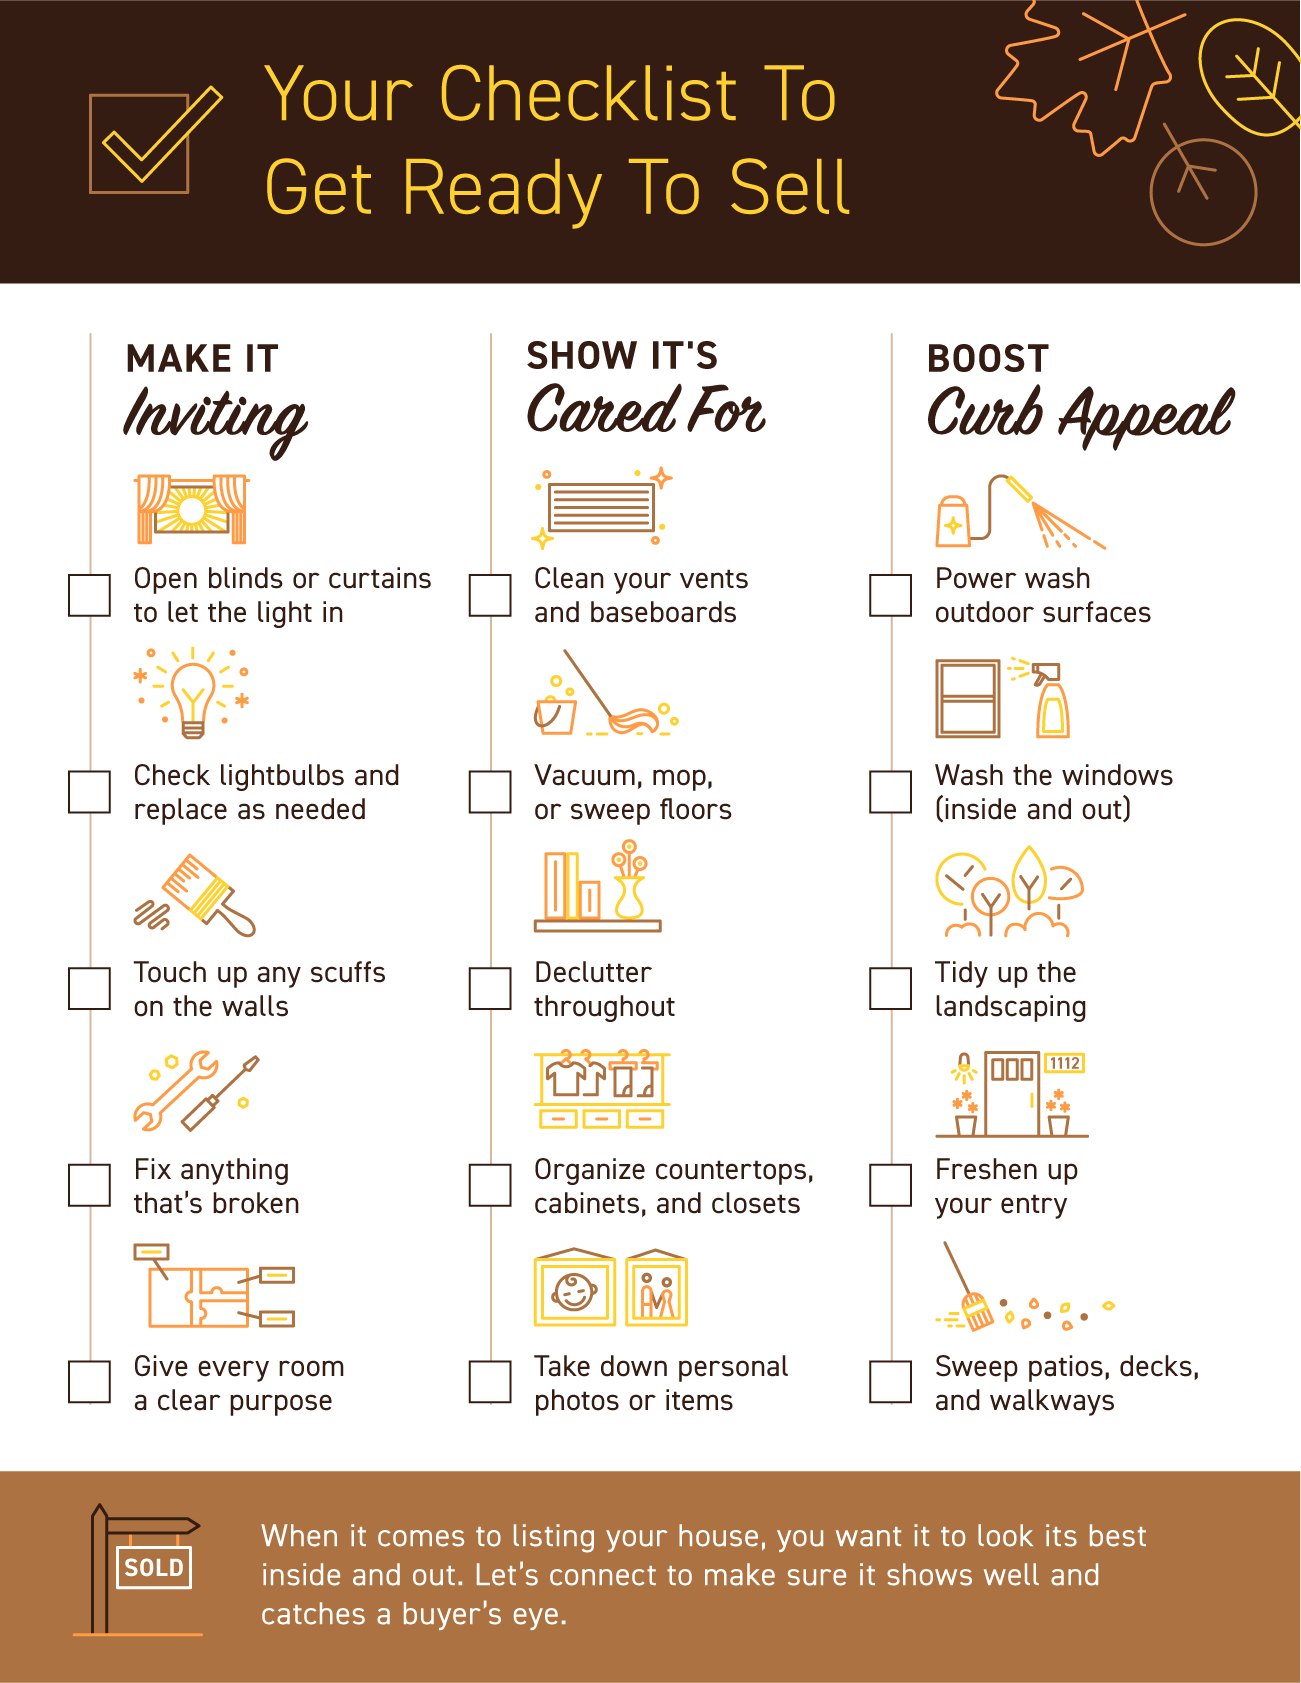 Your Checklist To Get Ready To Sell [INFOGRAPHIC] | Simplifying The Market